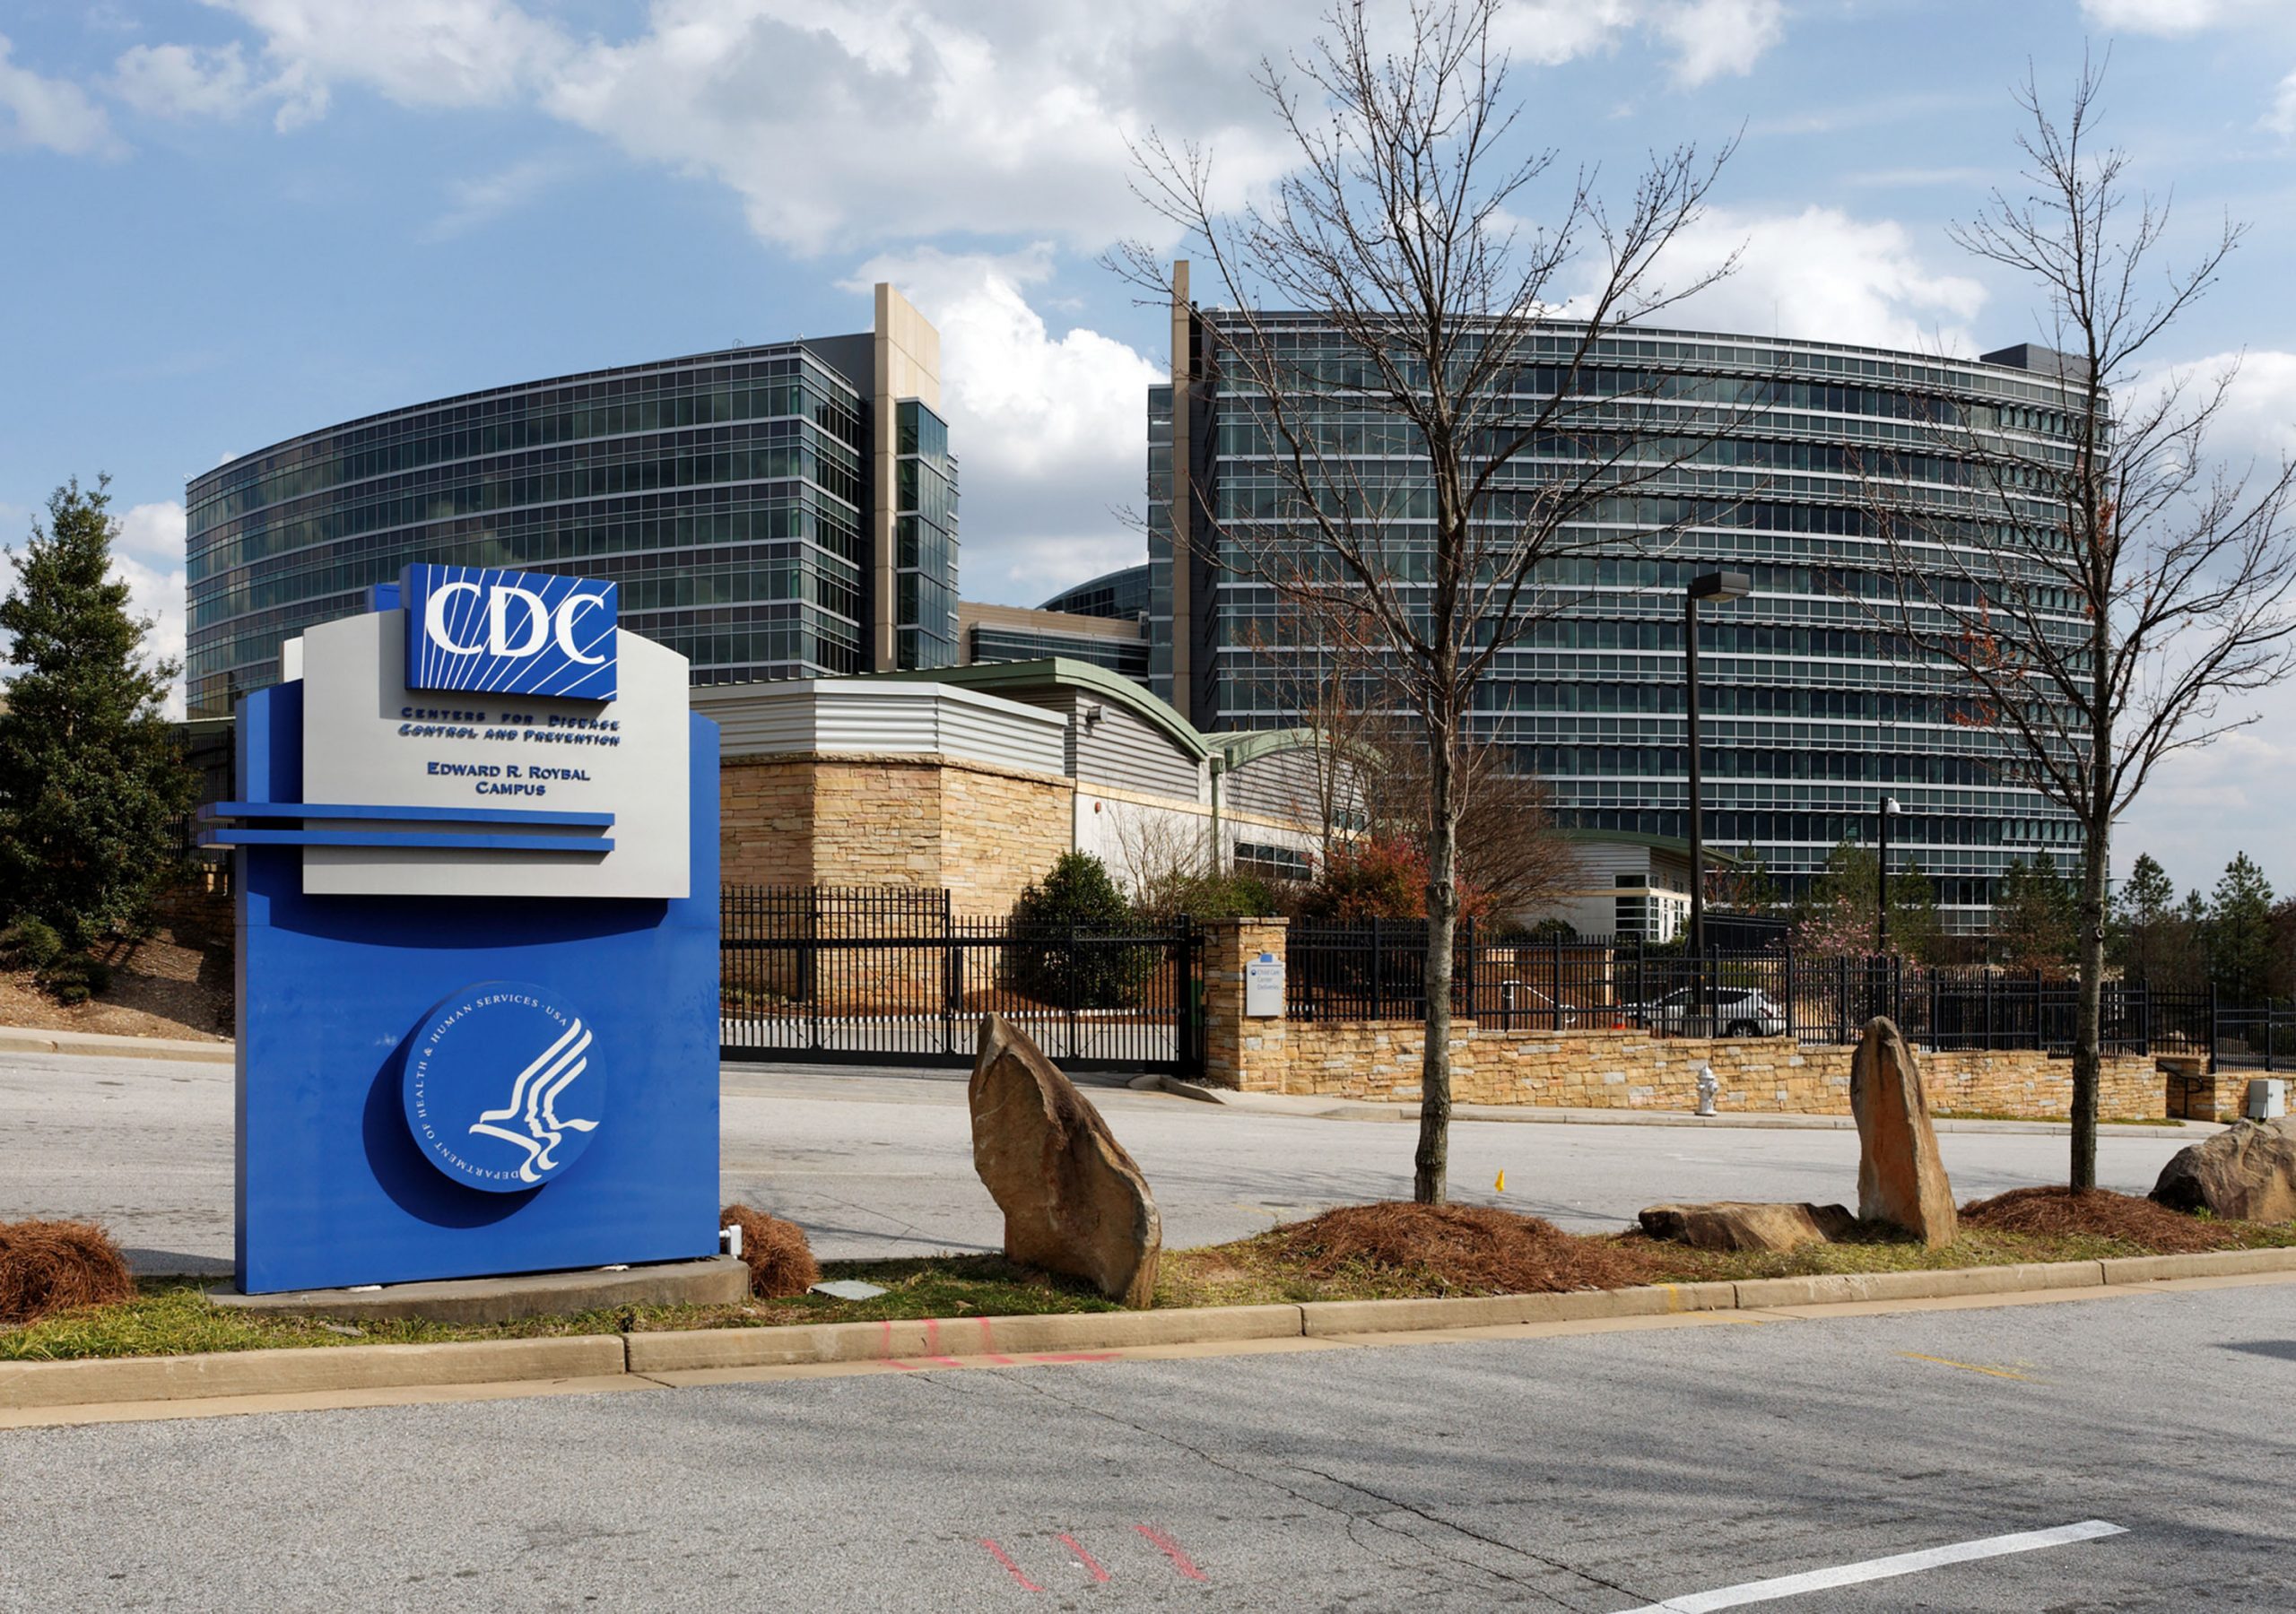 The Centers for Disease Control and Prevention headquarters in Atlanta. The CDC says about a third of people infected with coronavirus in the U.S. are asymptomatic. (Dreamstime/TNS)